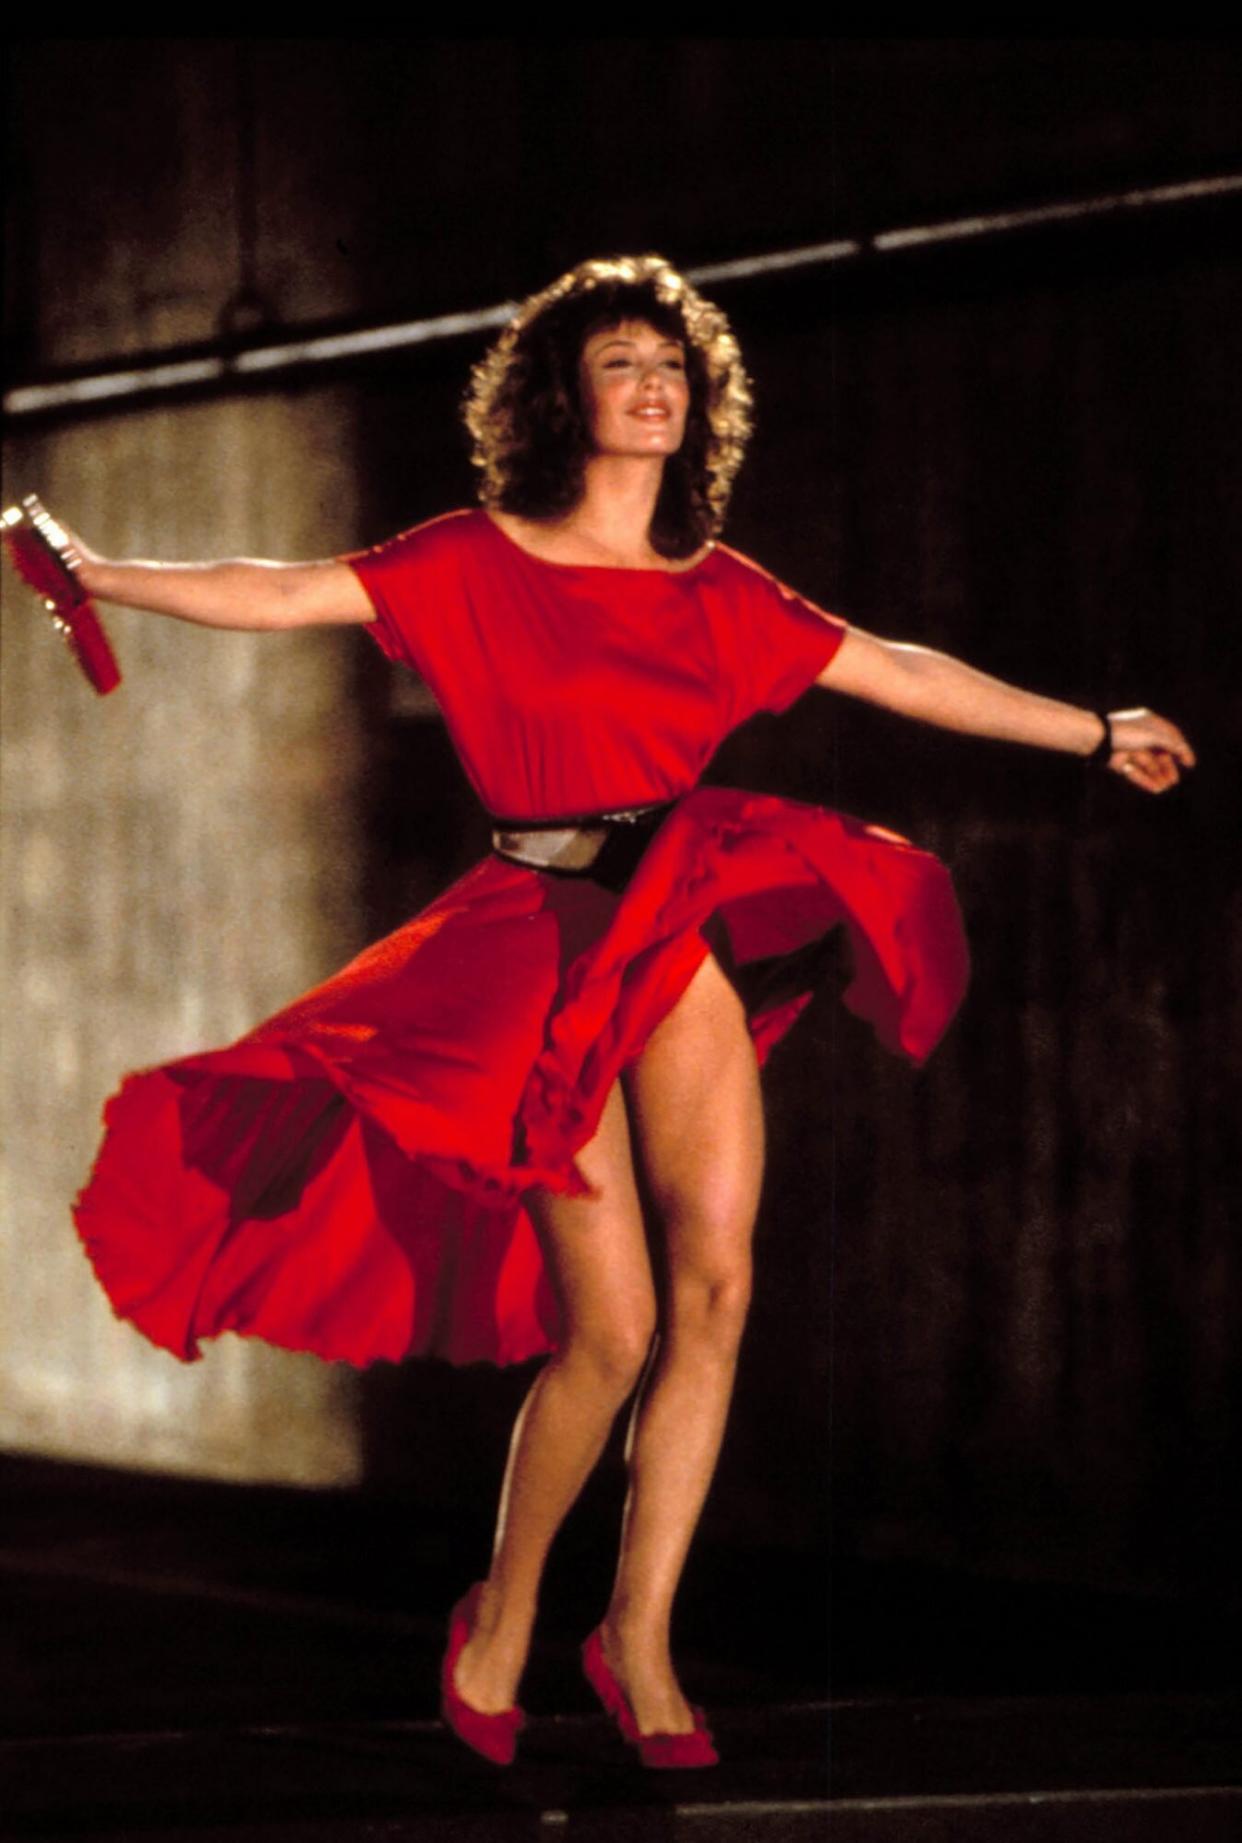 THE WOMAN IN RED, Kelly LeBrock, 1984. ©MGM/Courtesy Everett Collection